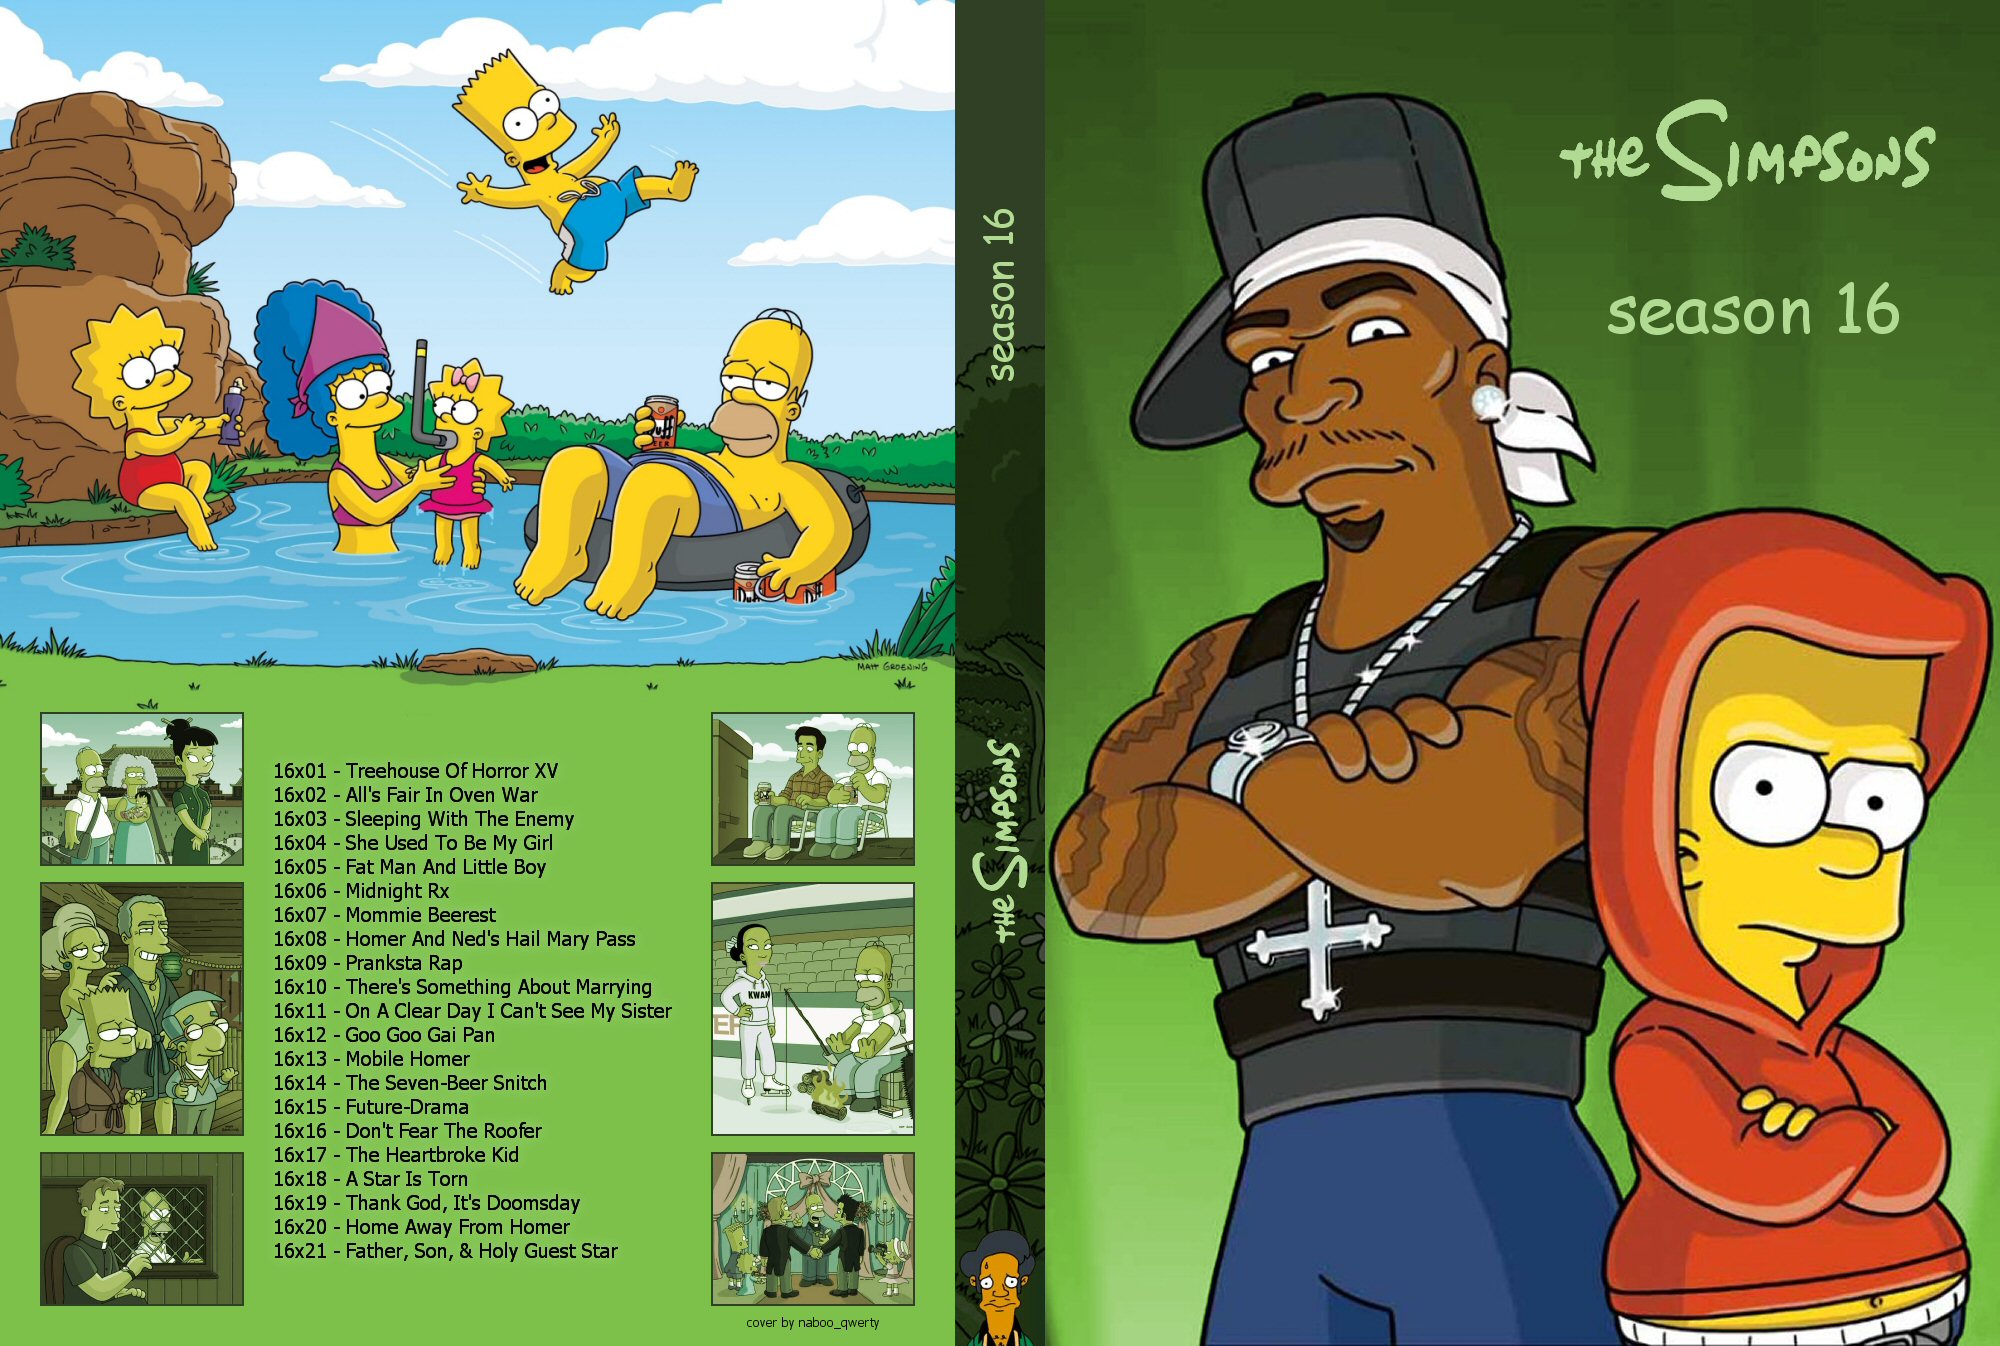 simpsons_cover_s16_(naboo_qwerty).jpg